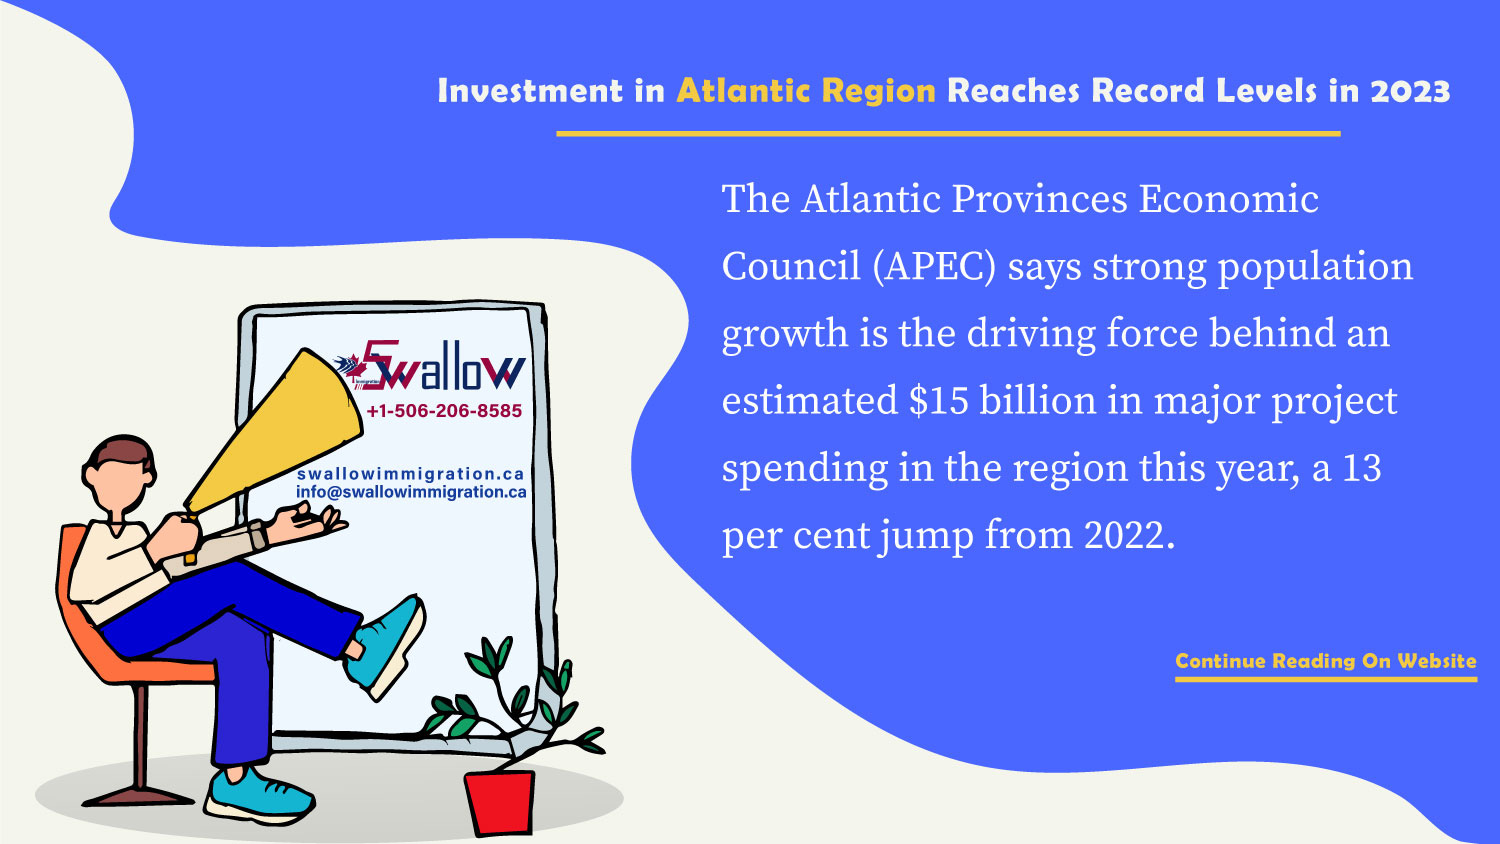 Investment in Atlantic Region Reaches Record Levels in 2023